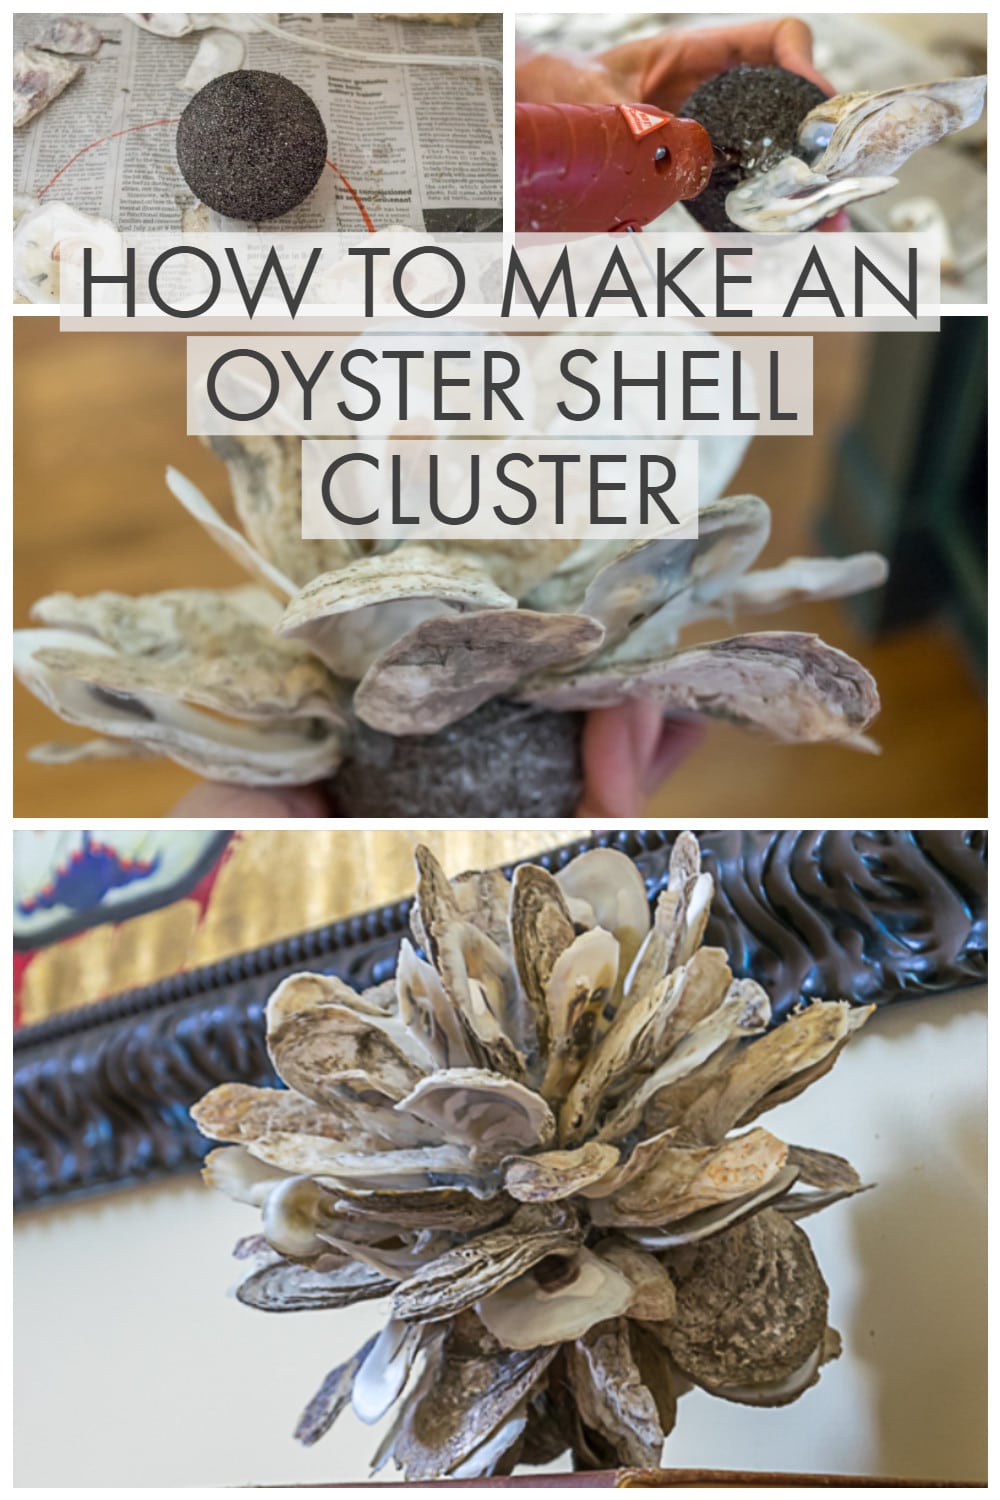 showing steps to make an oyster shell cluster